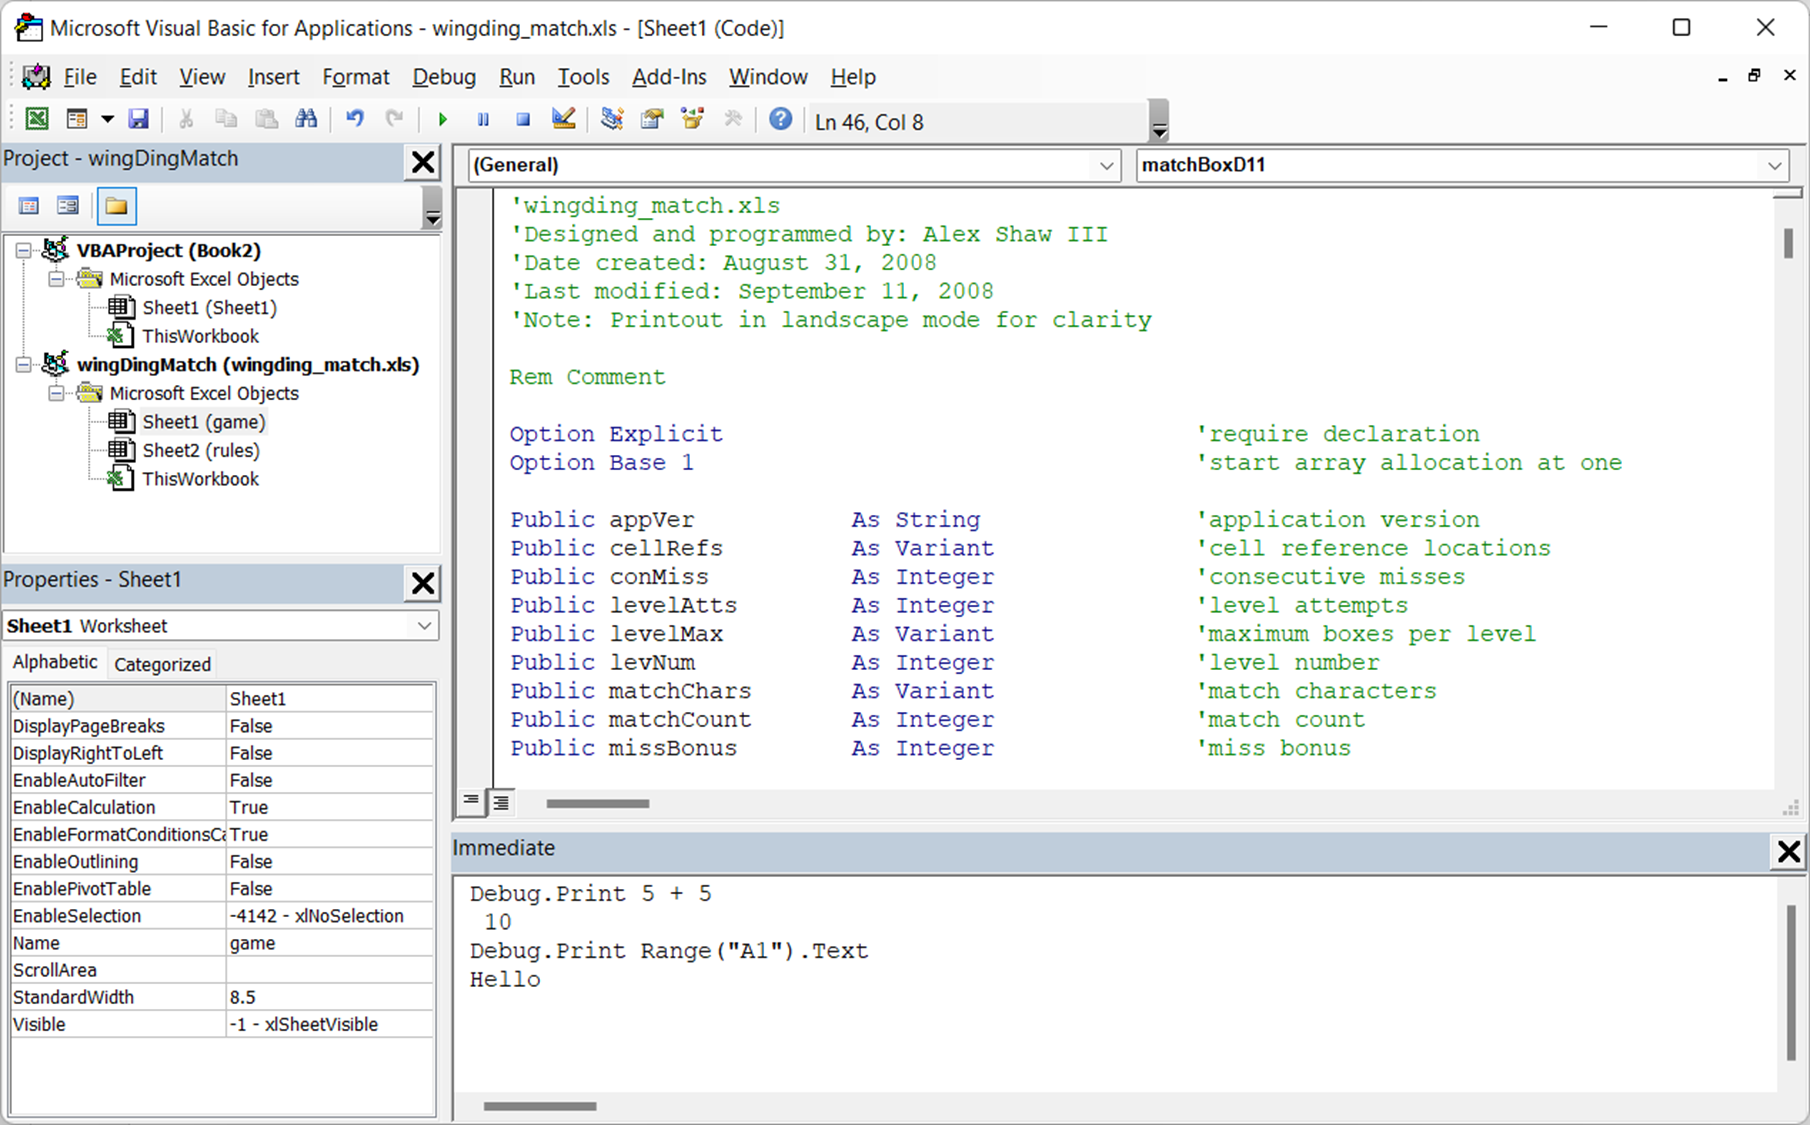 Add comments to your VBA code - How to